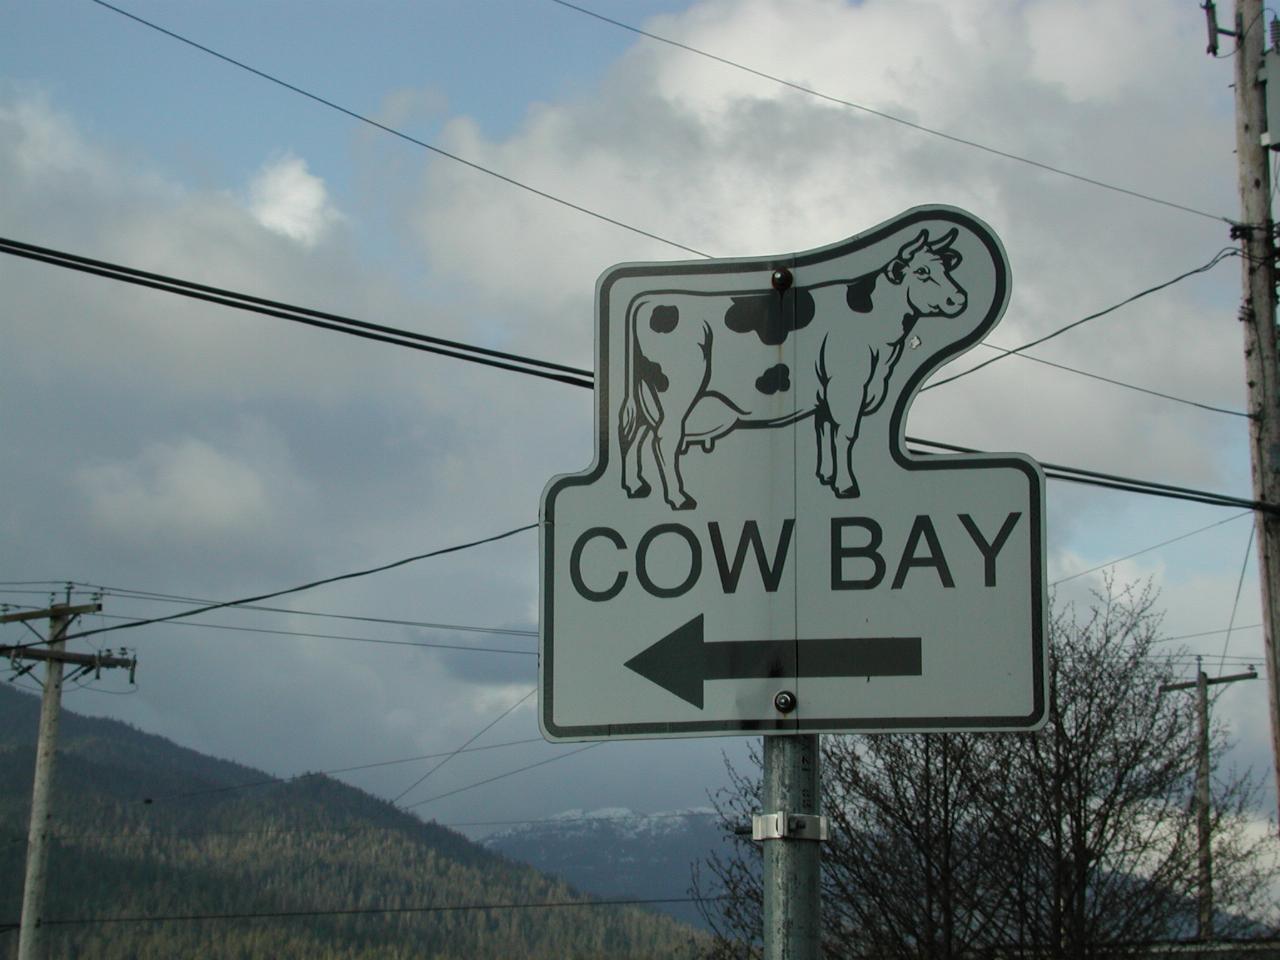 Yes, there IS a Cow Bay in Prince Rupert - it used to be a dairy!